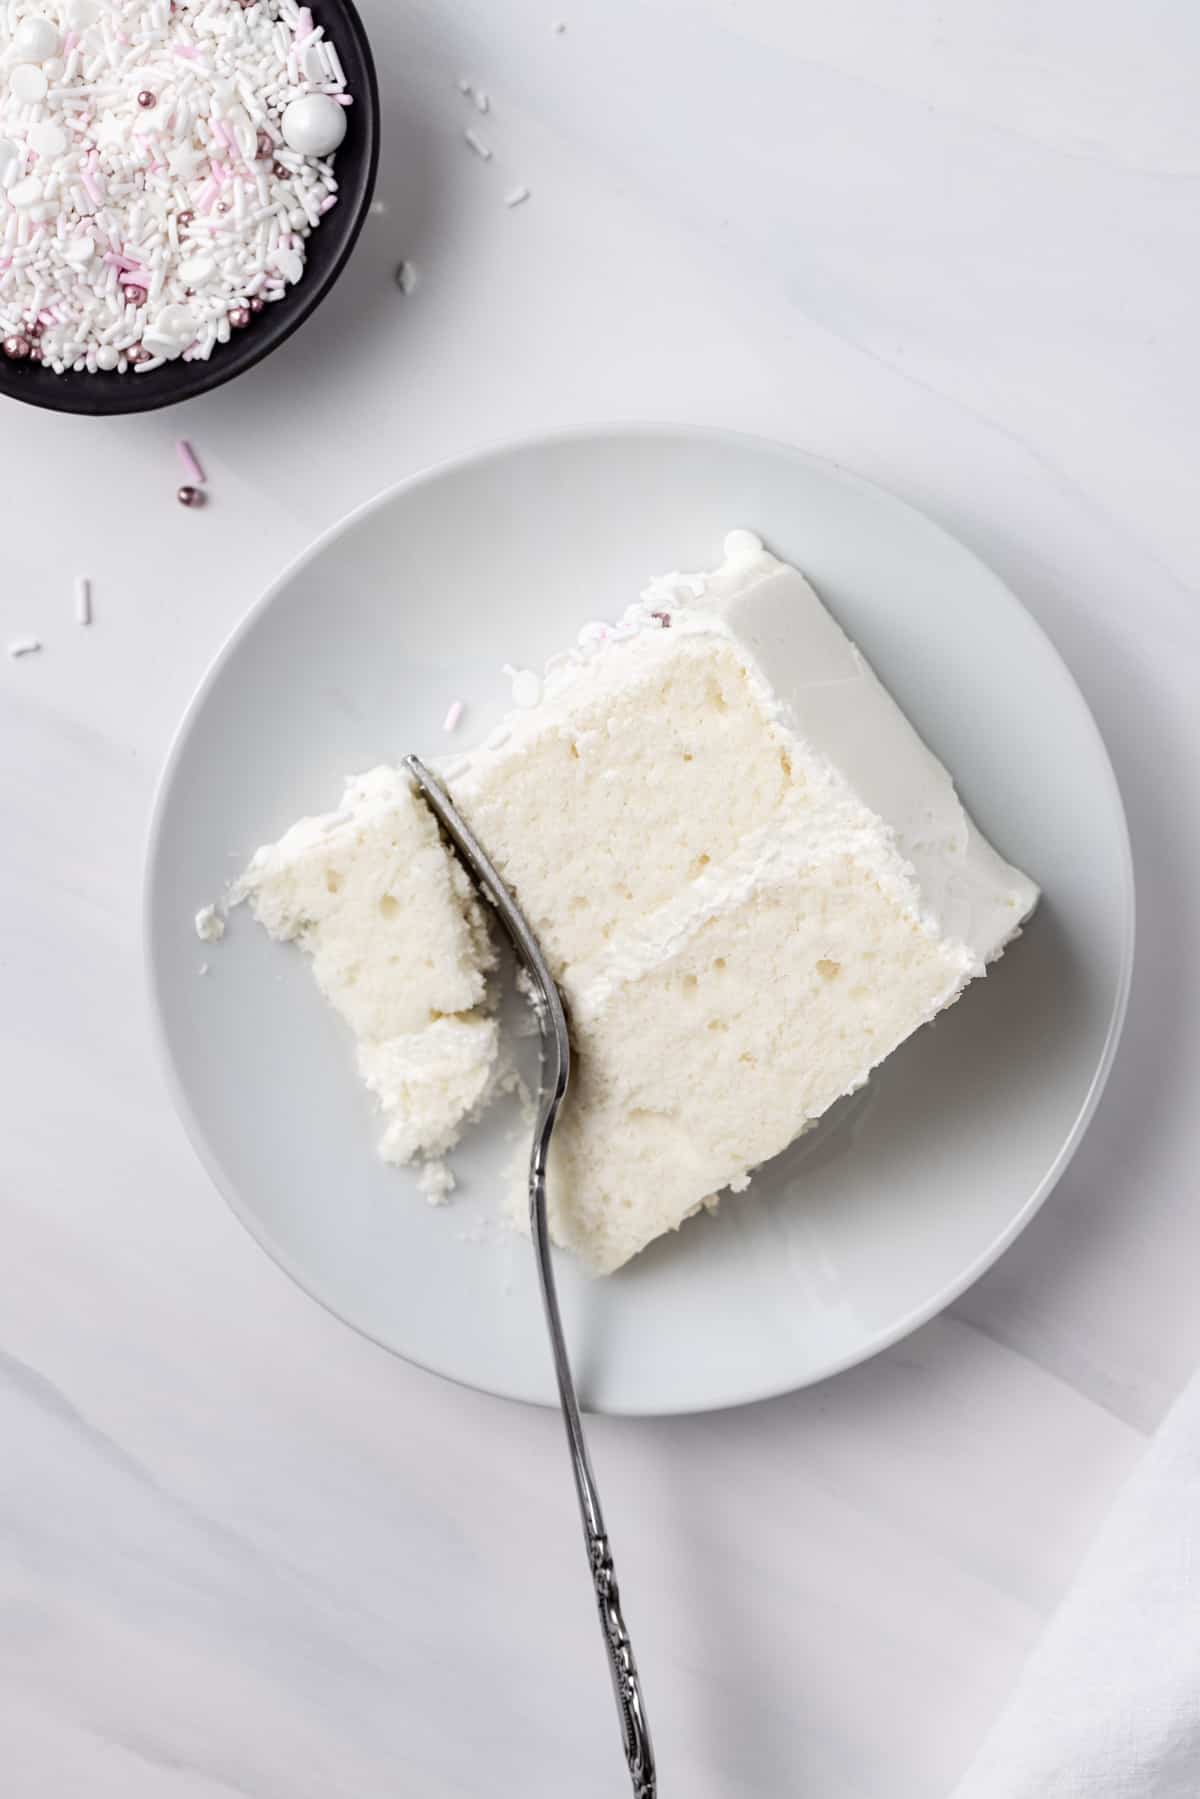 A slice of moist white cake with buttercream frosting on a plate, with a fork cutting off a bite